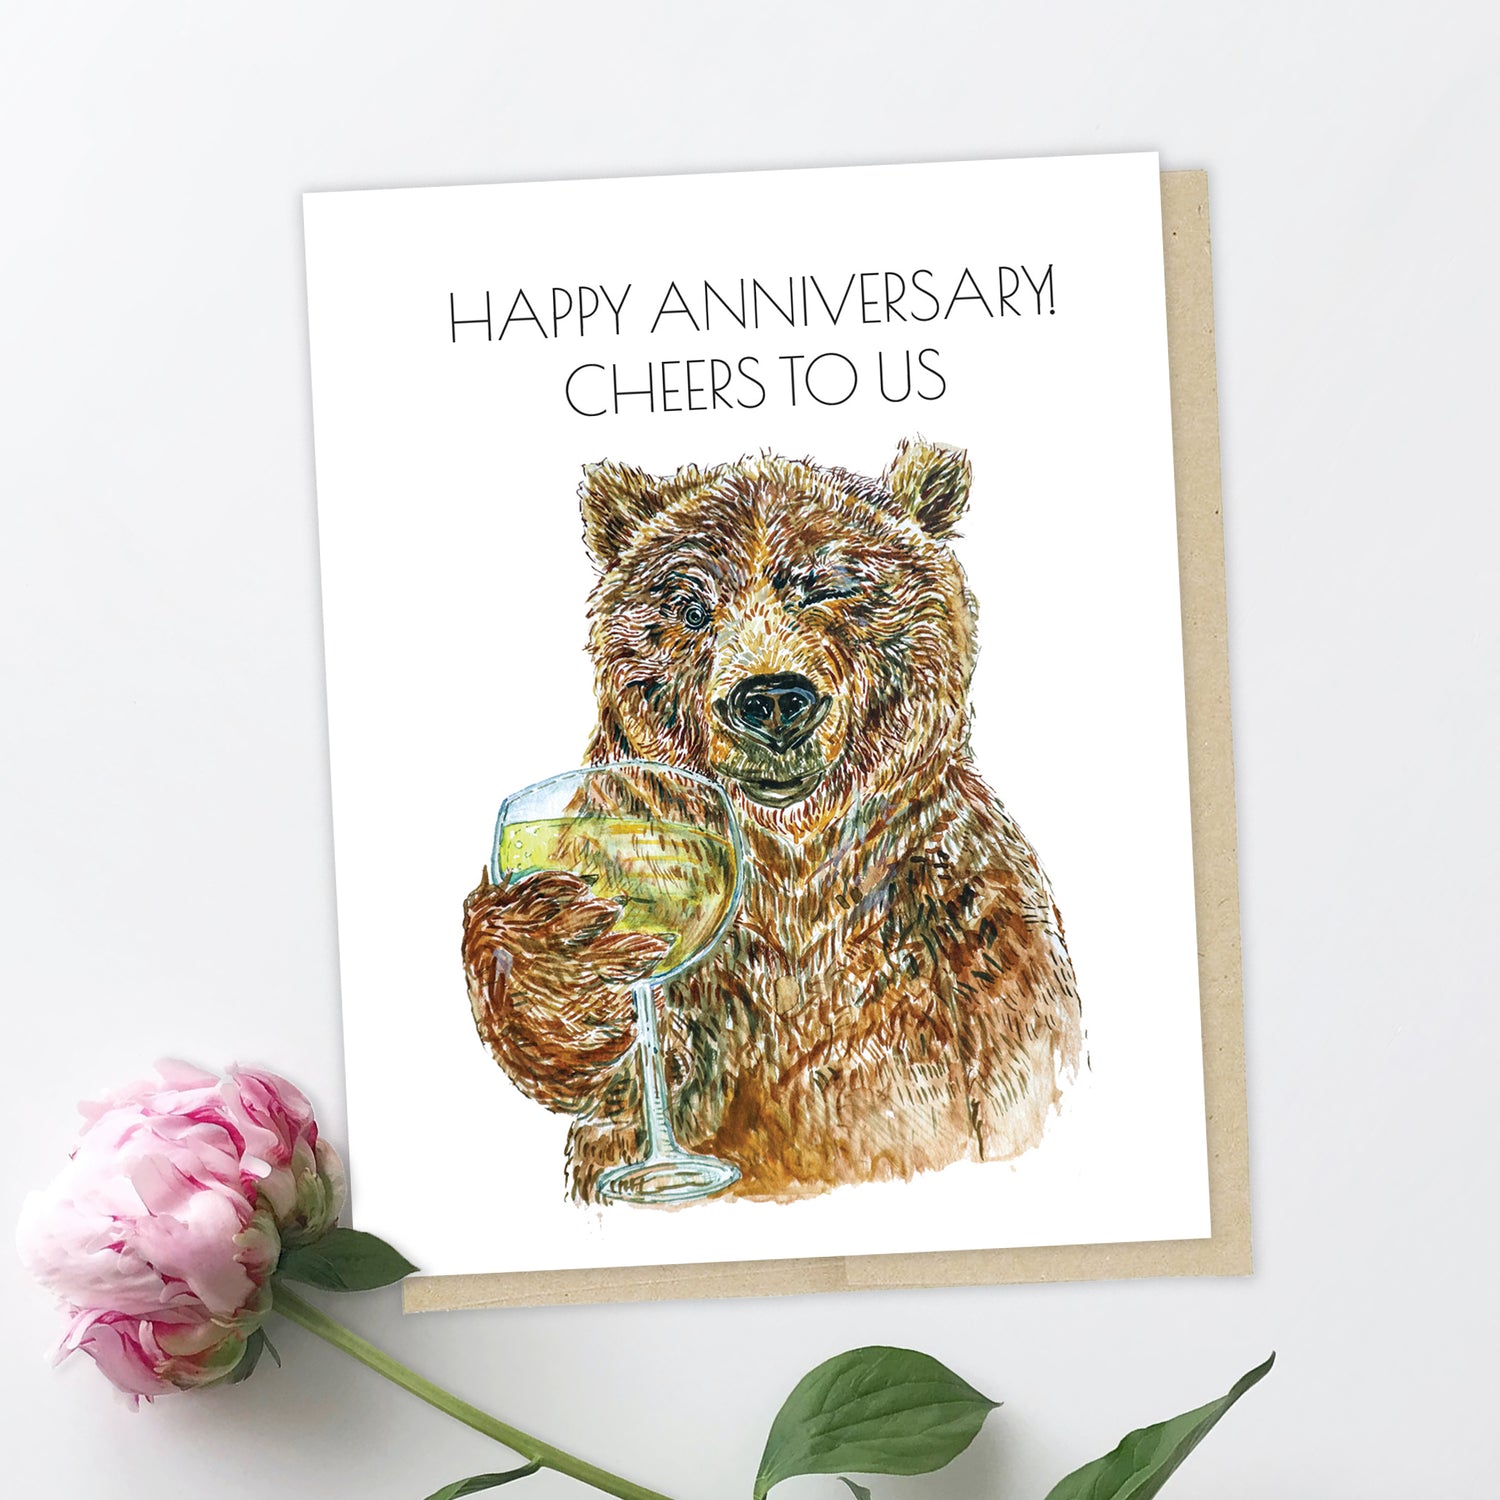 A greeting card and a peony. The card features a brown, grizzly bear holding a glass of champagne. It is winking and looking at you, smiling, the expression like Jay Gatsby in the party scene in the Great Gatsby movie. The text reads: Happy Anniversary! Cheers to us.